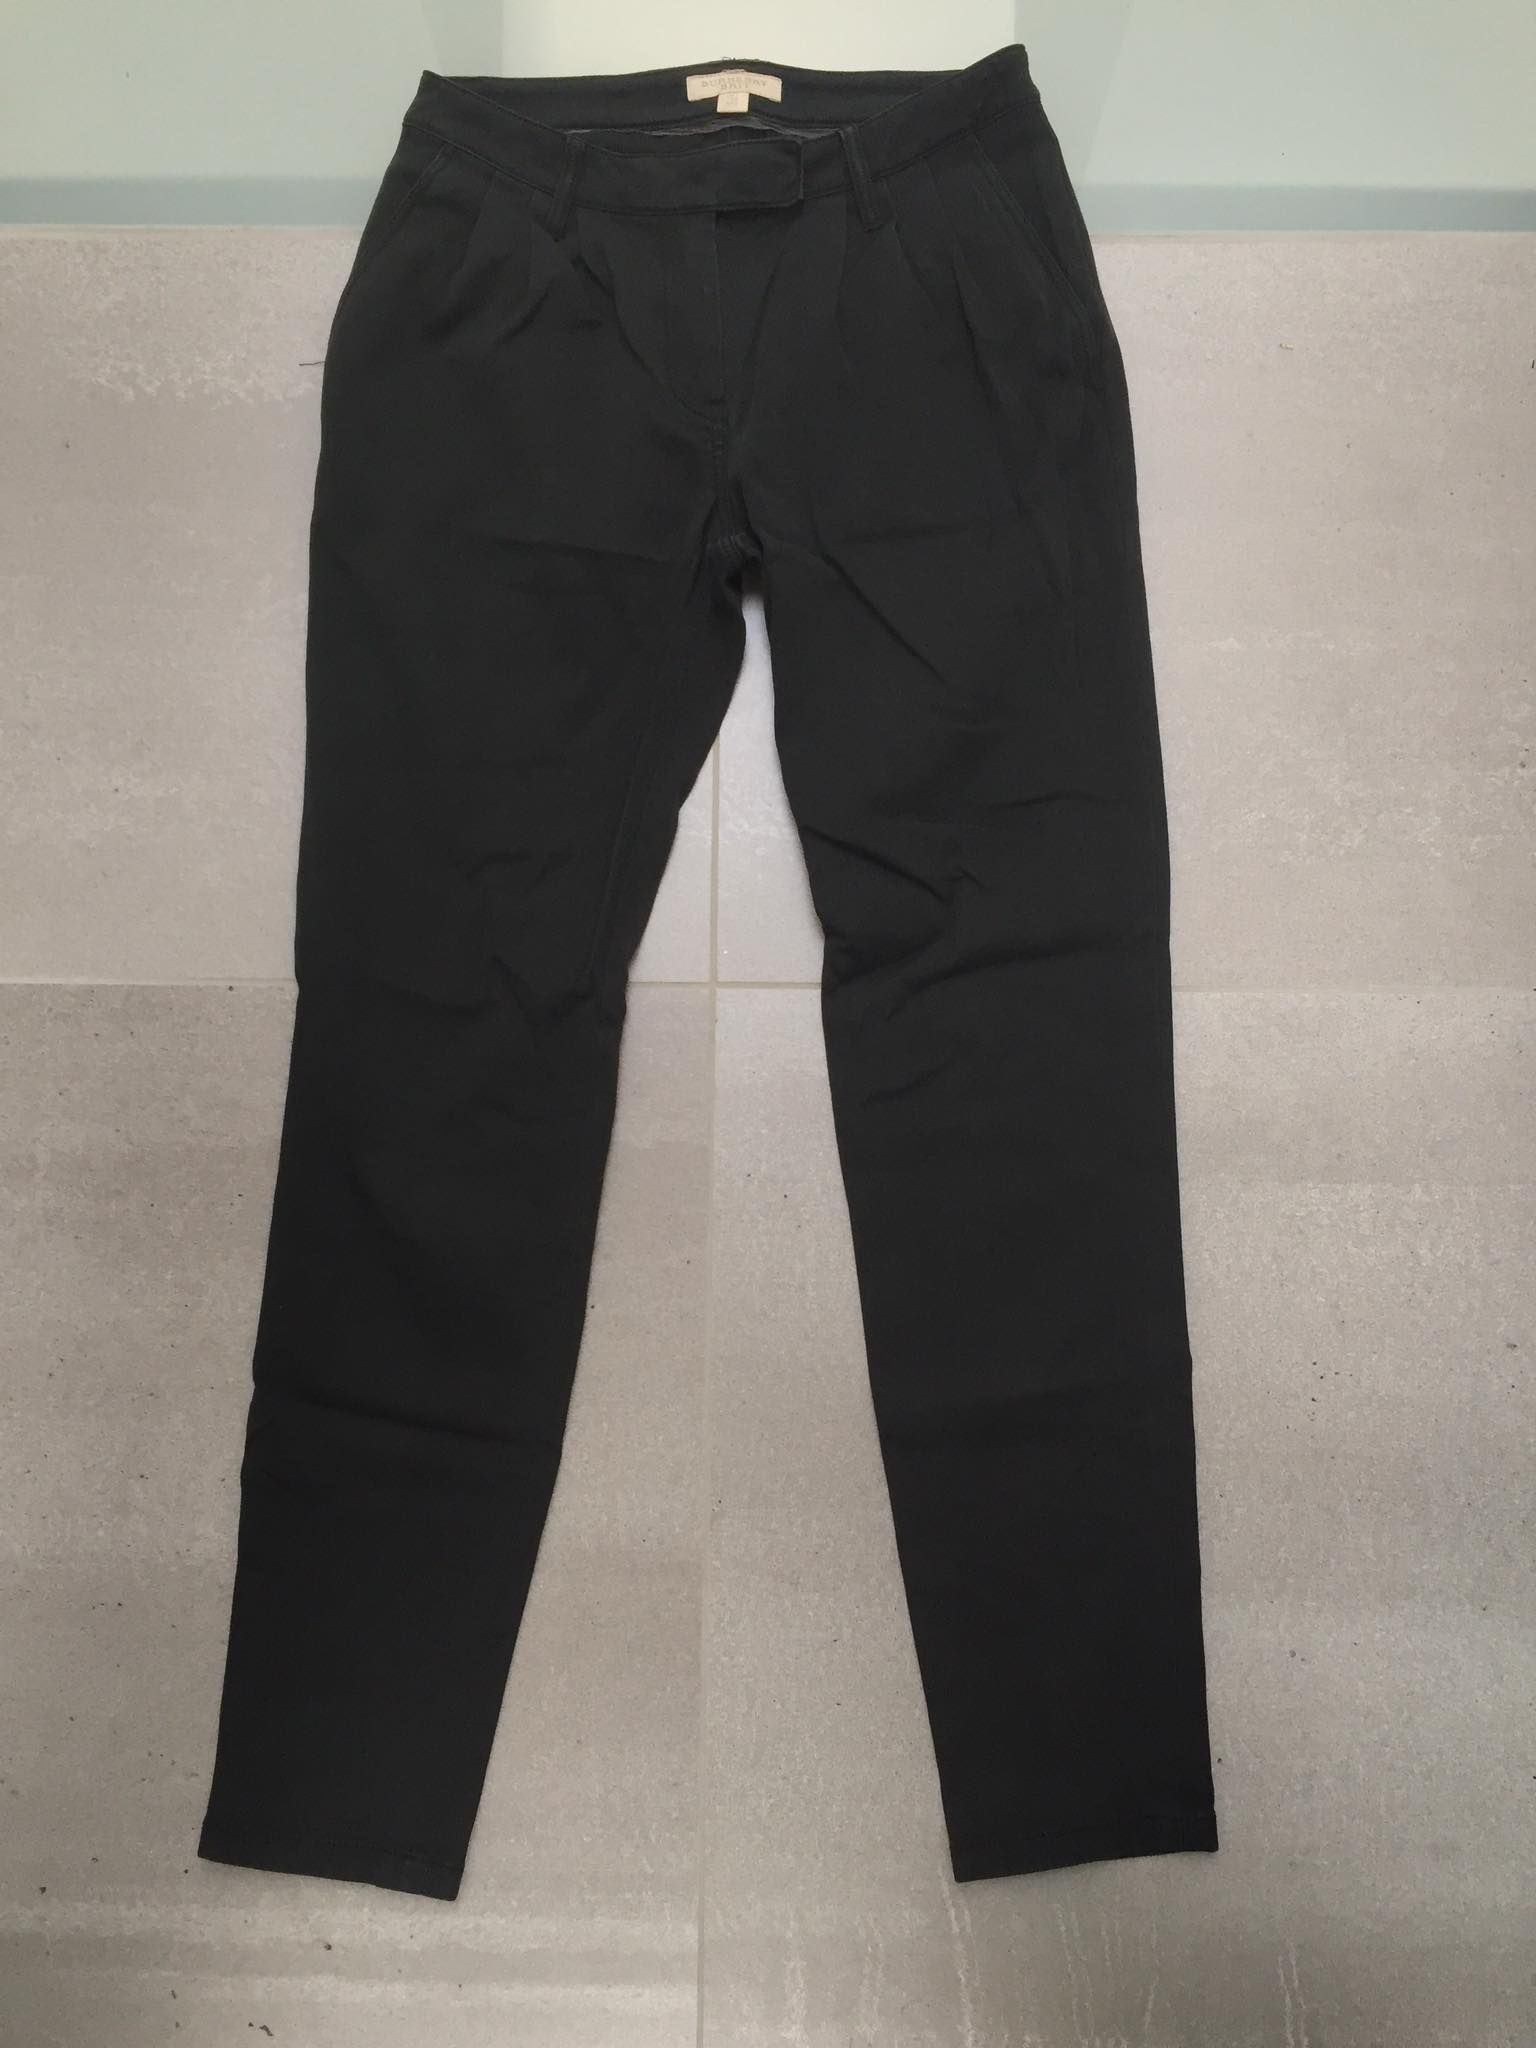 Burberry Burberry Trousers Size US 26 / EU 42 - 1 Preview